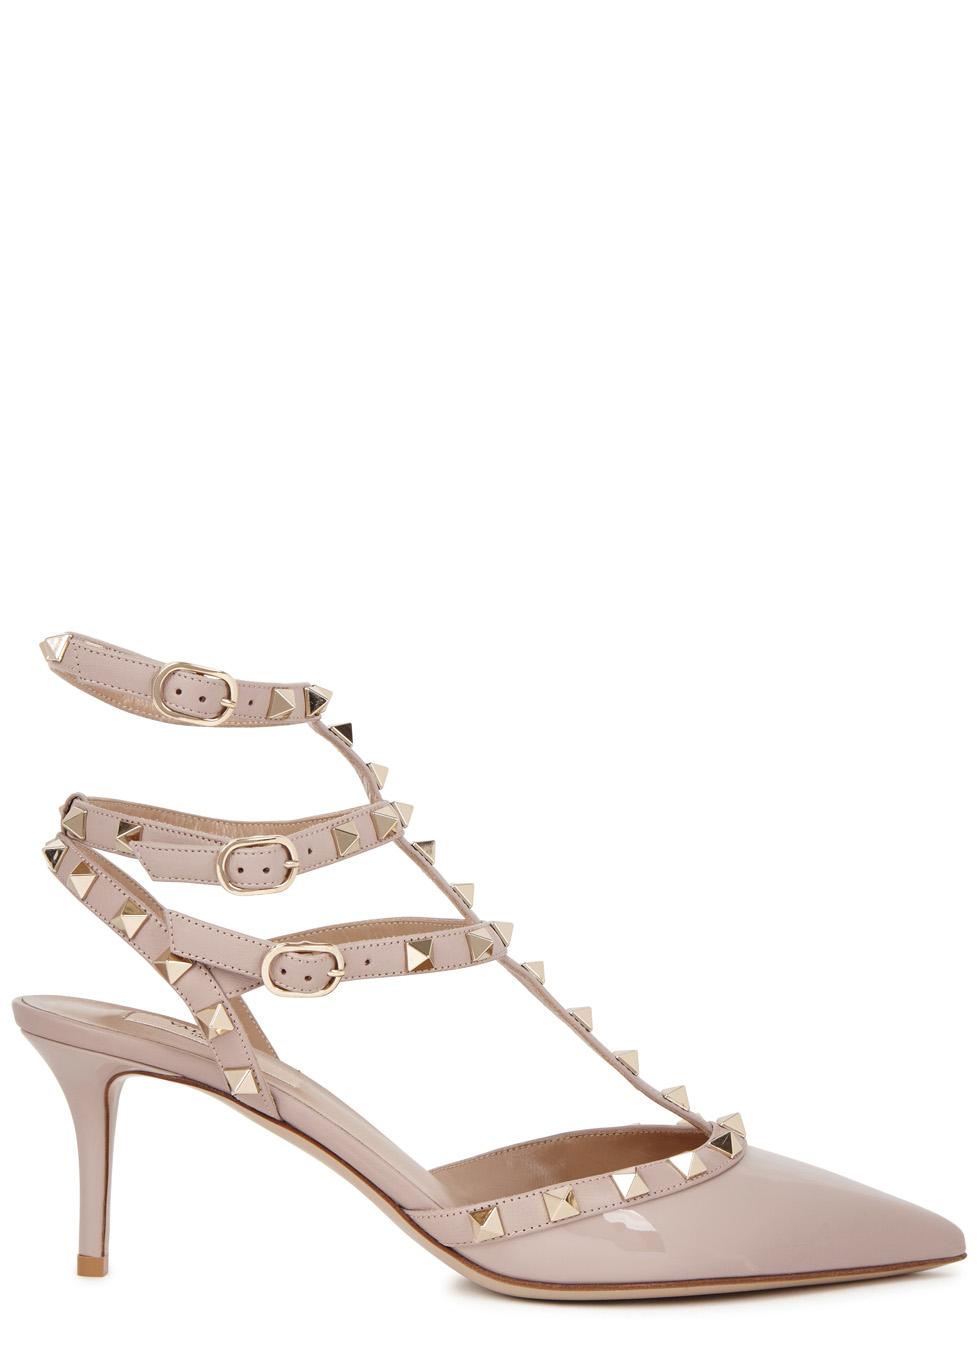 Jimmy Choo Sepia Patent Leather Trimmed Pumps in Nude 